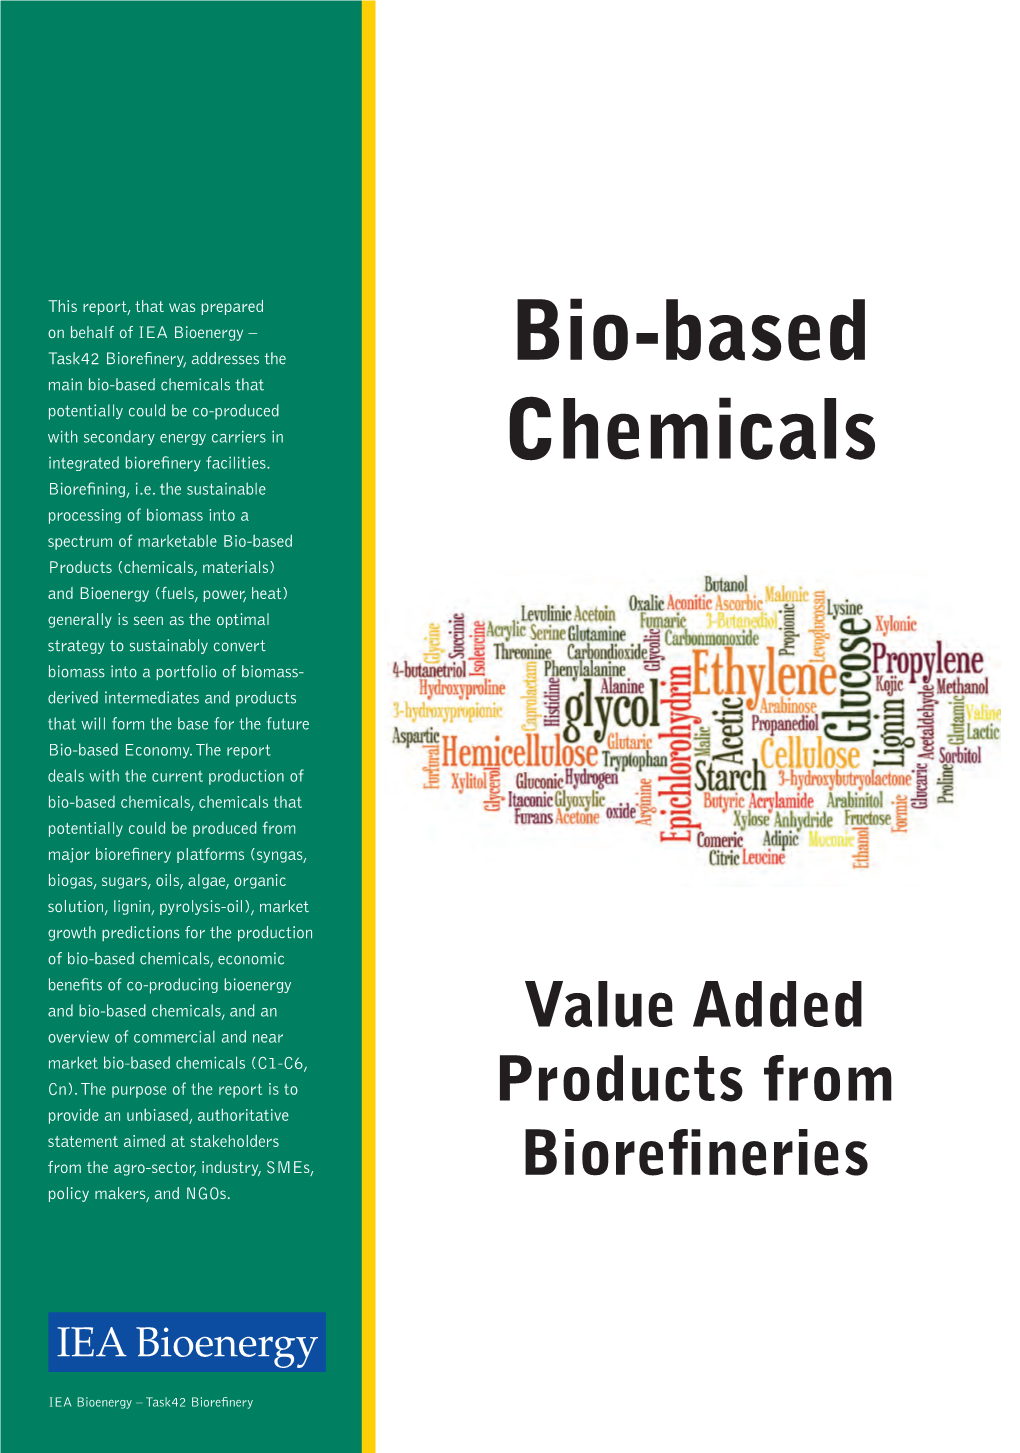 Bio-Based Chemicals: Value Added Products from Biorefineries